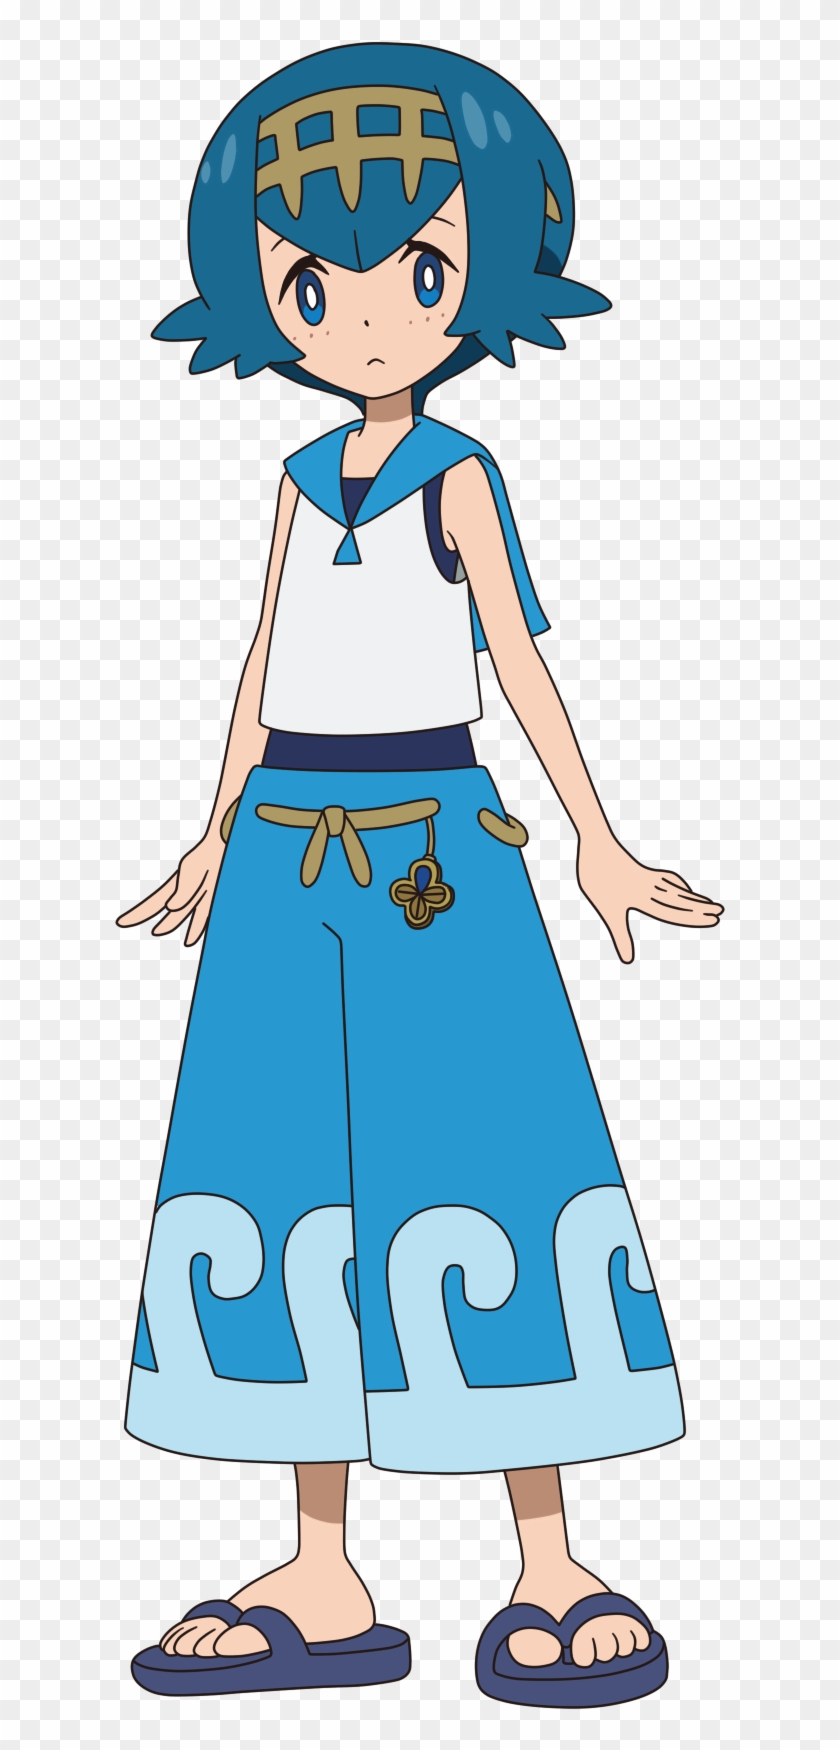 Lana Anime Artwork By Tzblacktd Lana Anime Artwork Pokemon Sun And Moon Characters Free Transparent Png Clipart Images Download